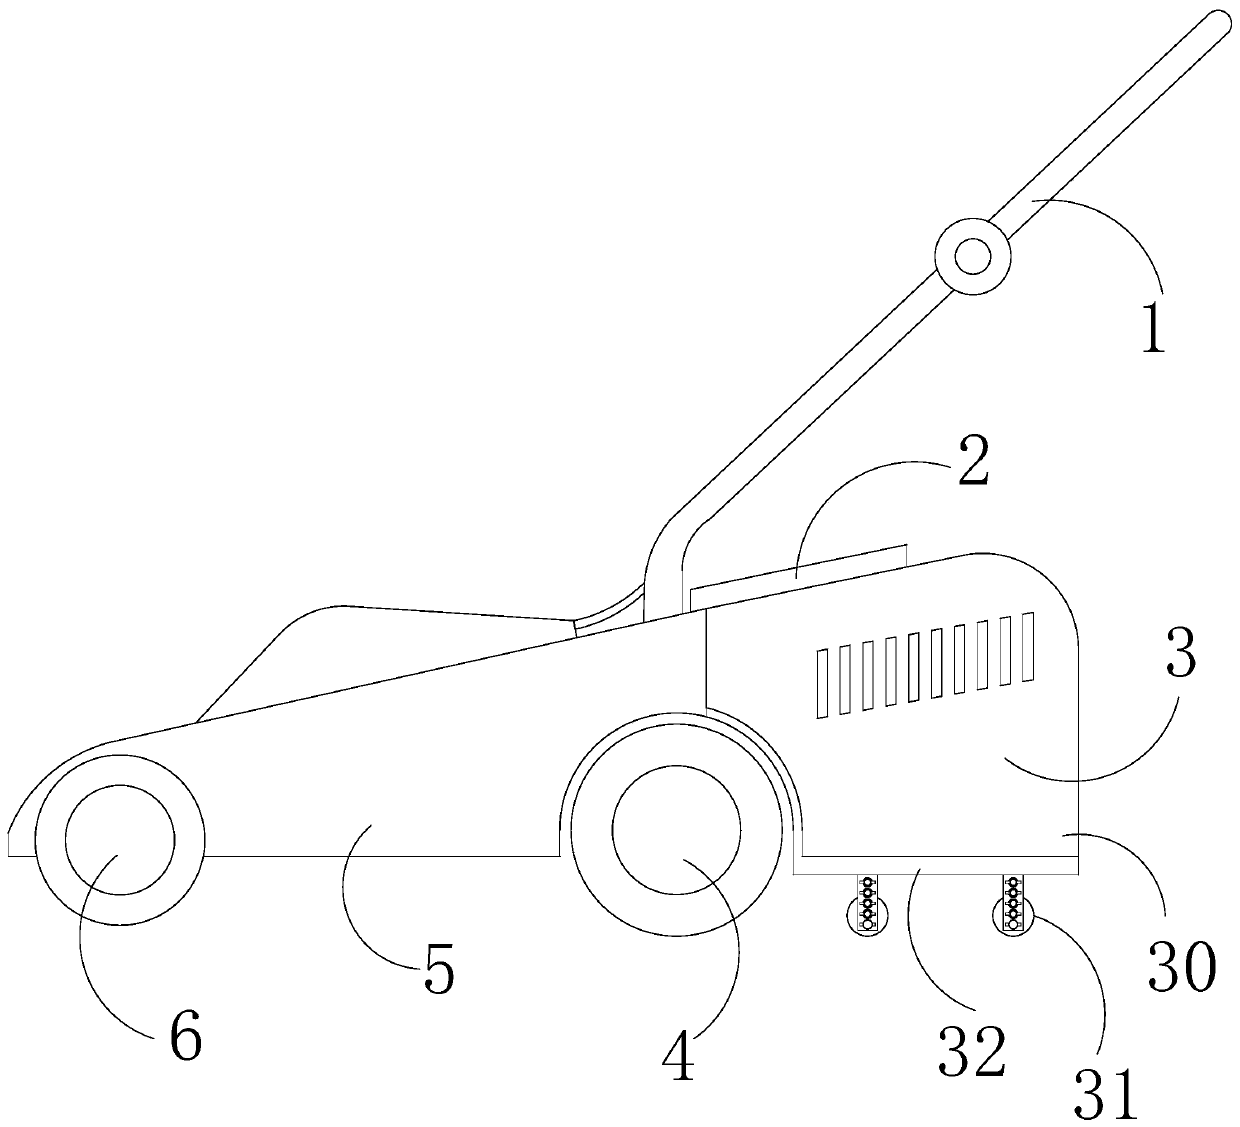 Improved electric mower capable of preventing grass collection basket from separating from mower body